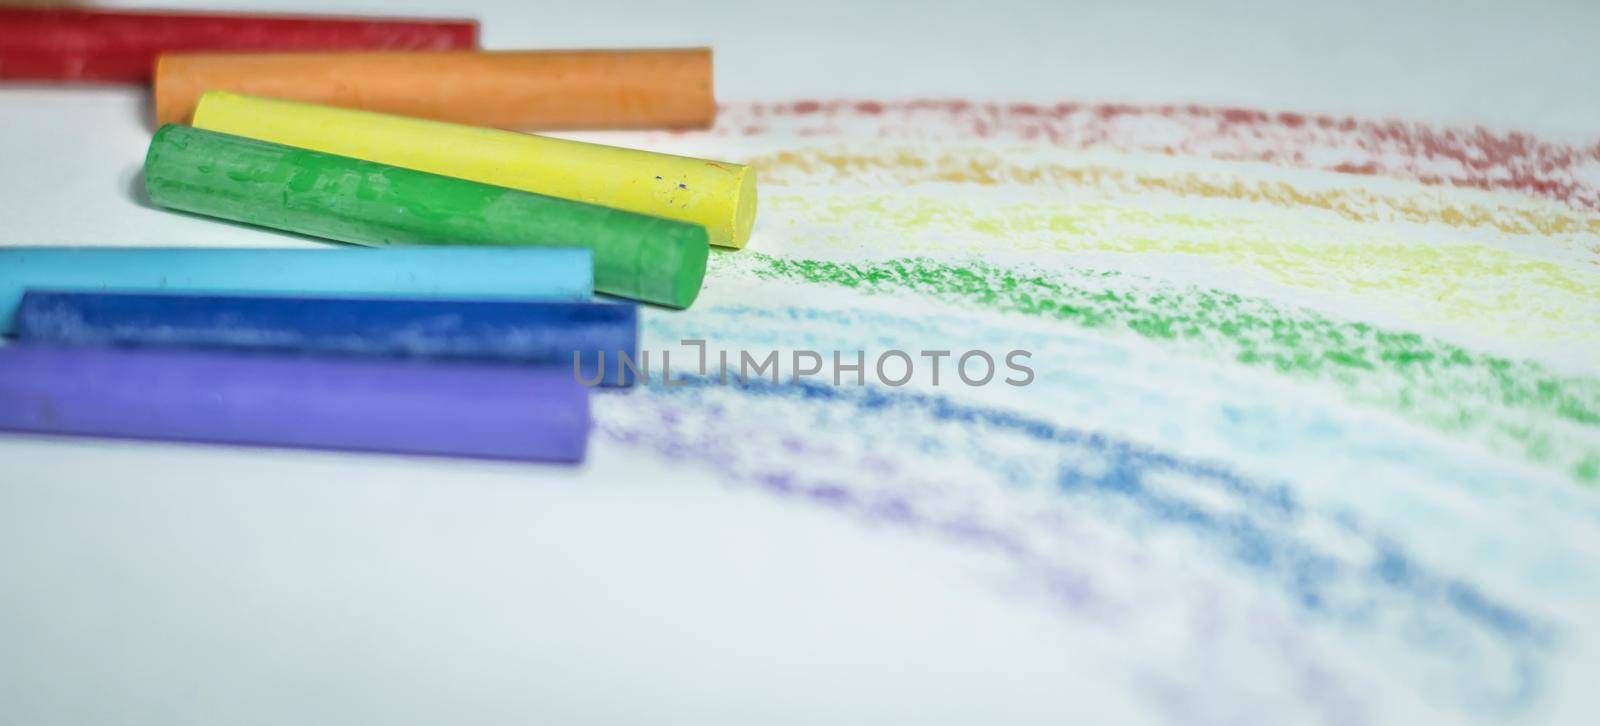 children crayons to draw.isolated on a white background.photo with copy space